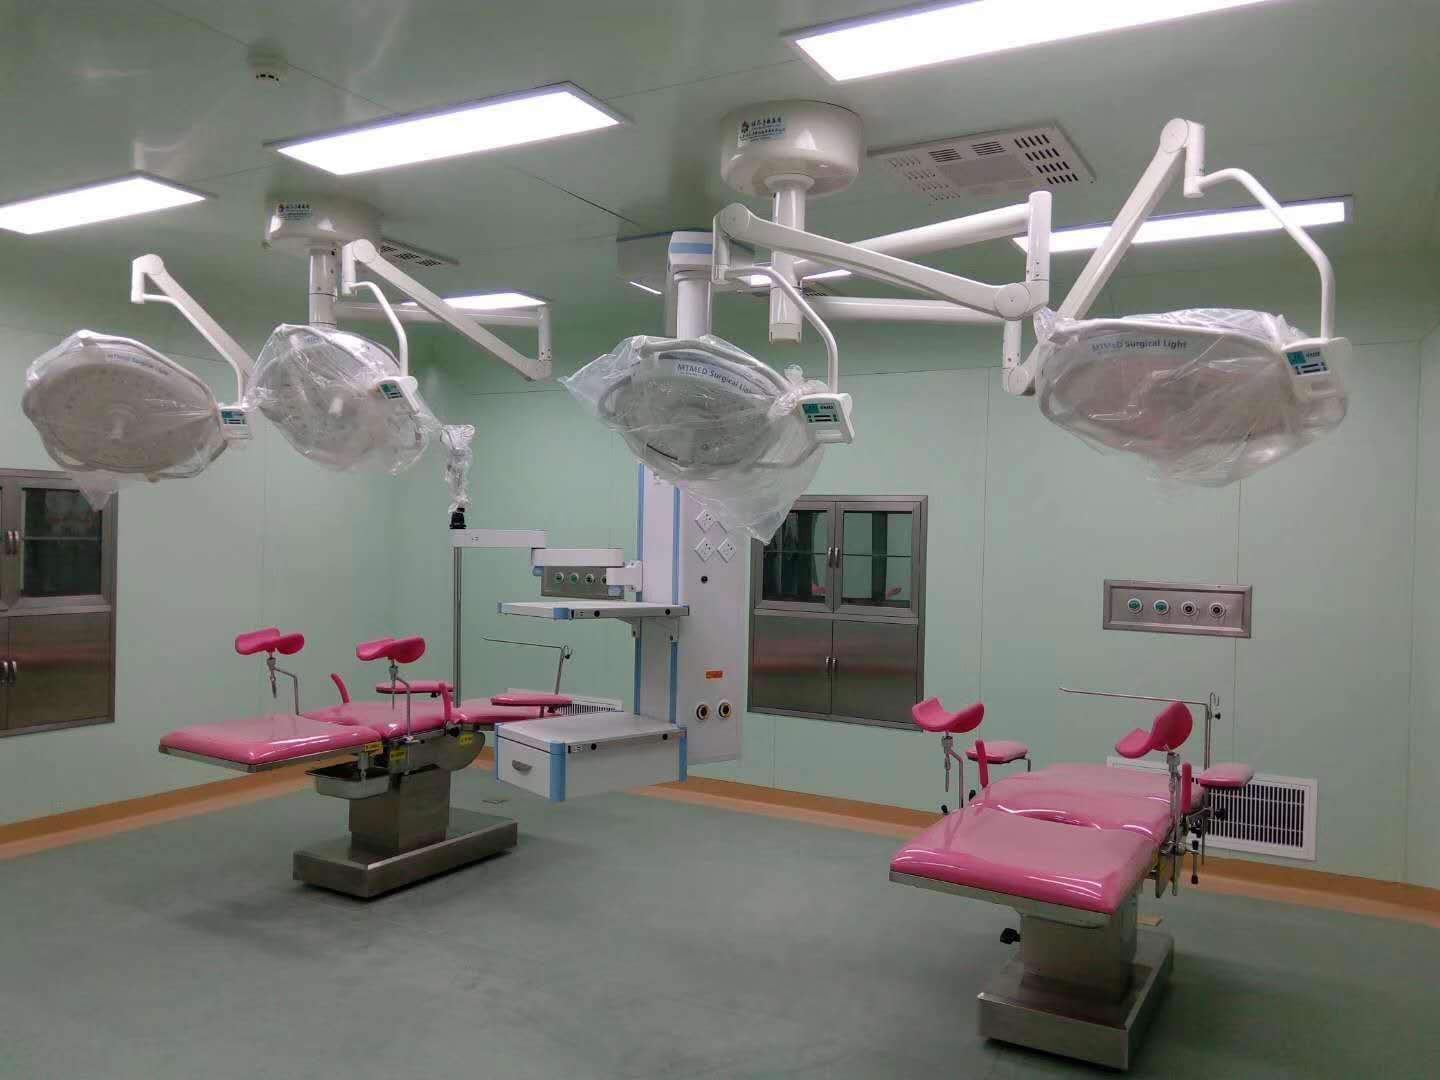 Fifteen years of purification experience in Shandong edbai laminar flow operating room